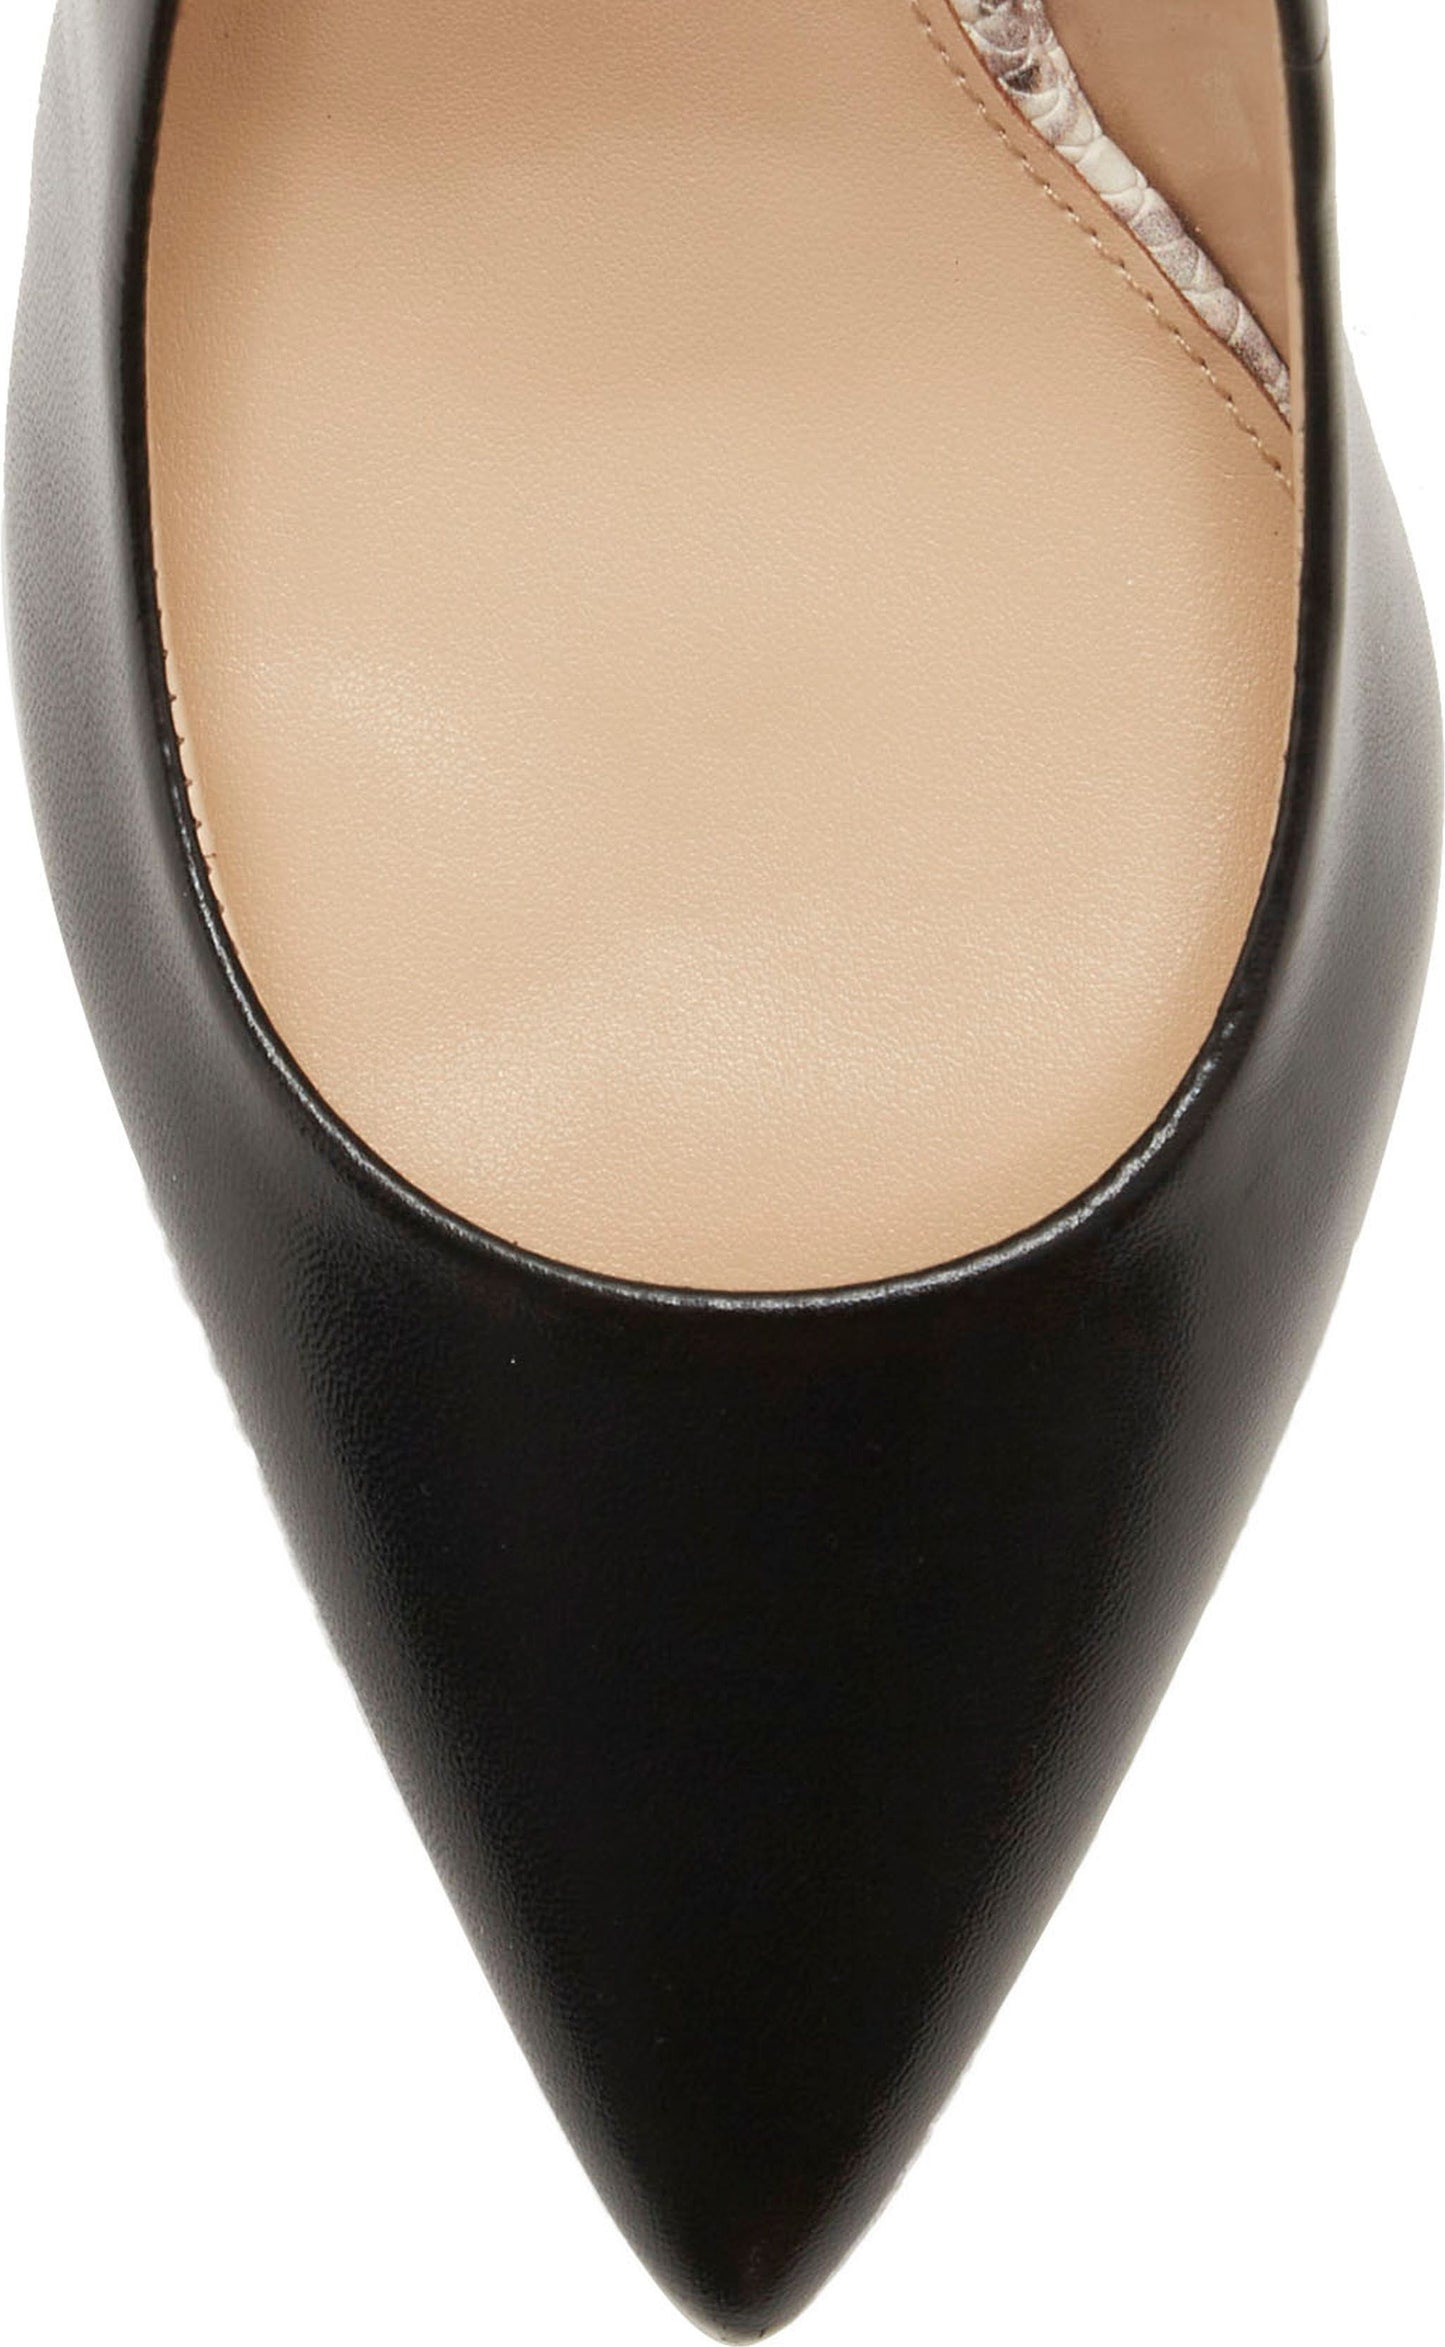 Vince Camuto Shoes Thanley Glossy Black